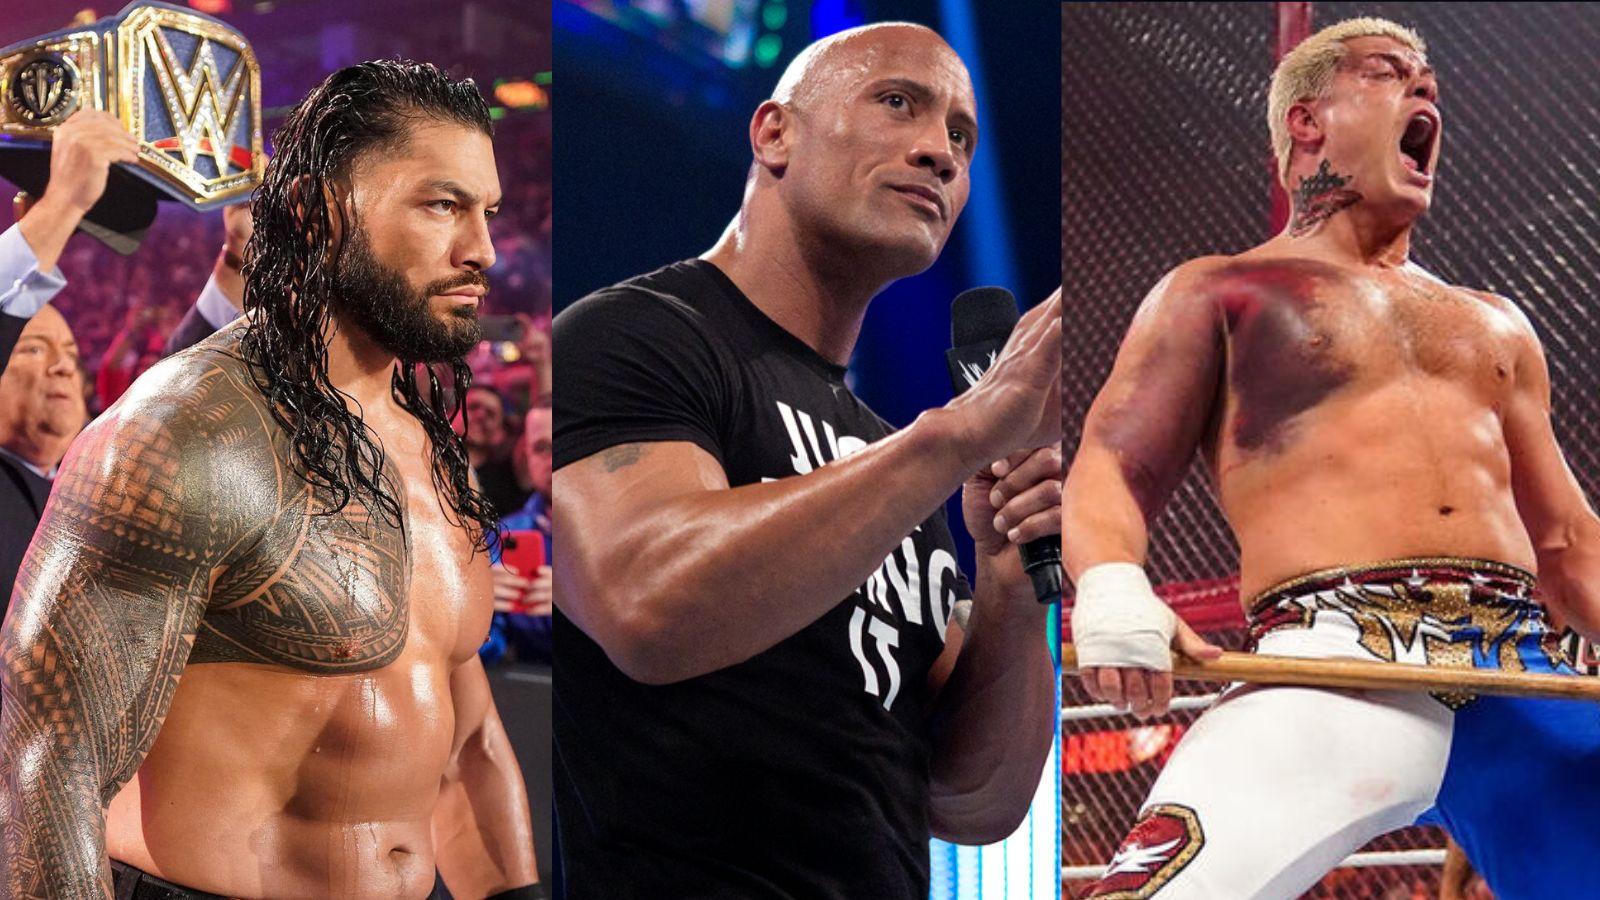 Roman Reigns (left) and The Rock (center) and Cody Rhodes (right) all in wrestling arenas at different times.